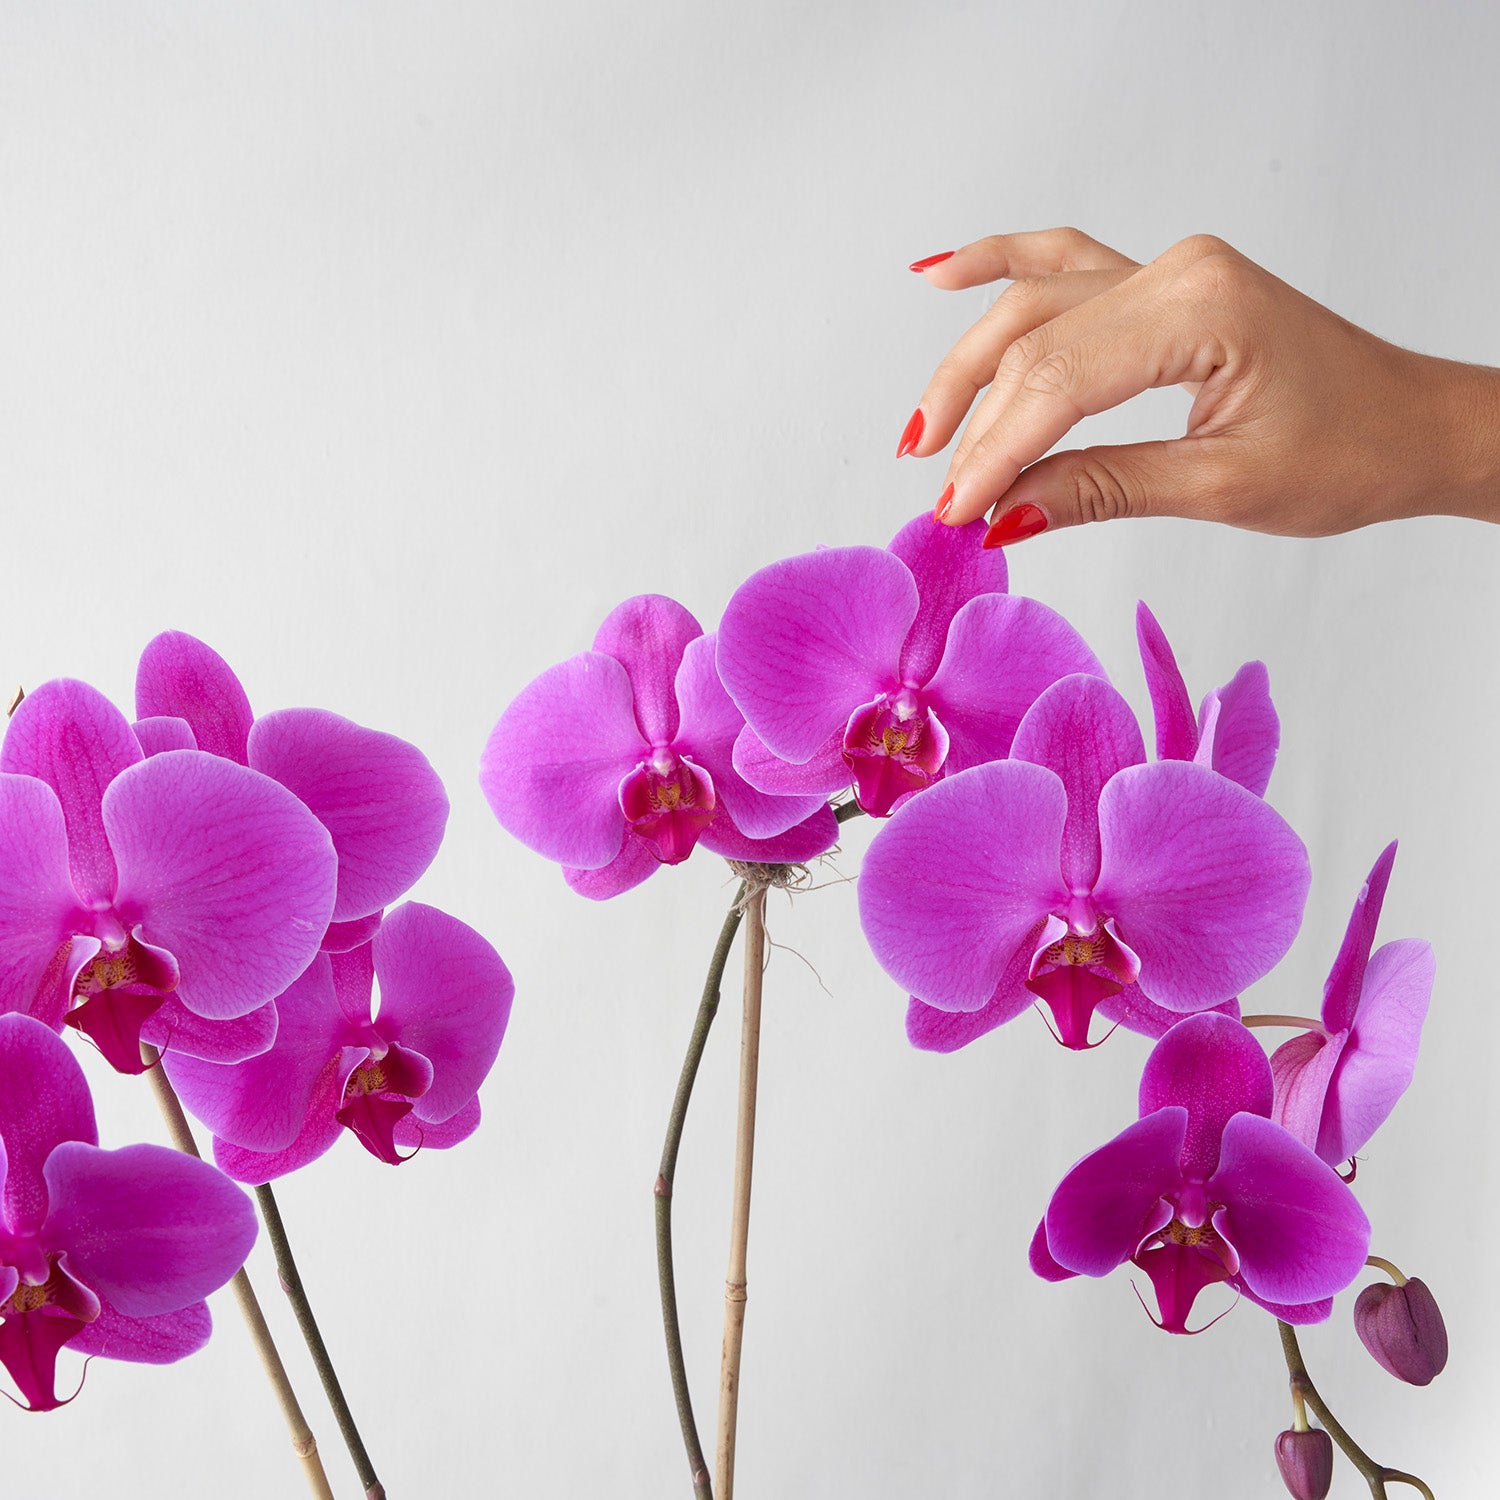 Hand with red nail polish touching Fuchsia pink phalaenopsis orchid flower on white background.